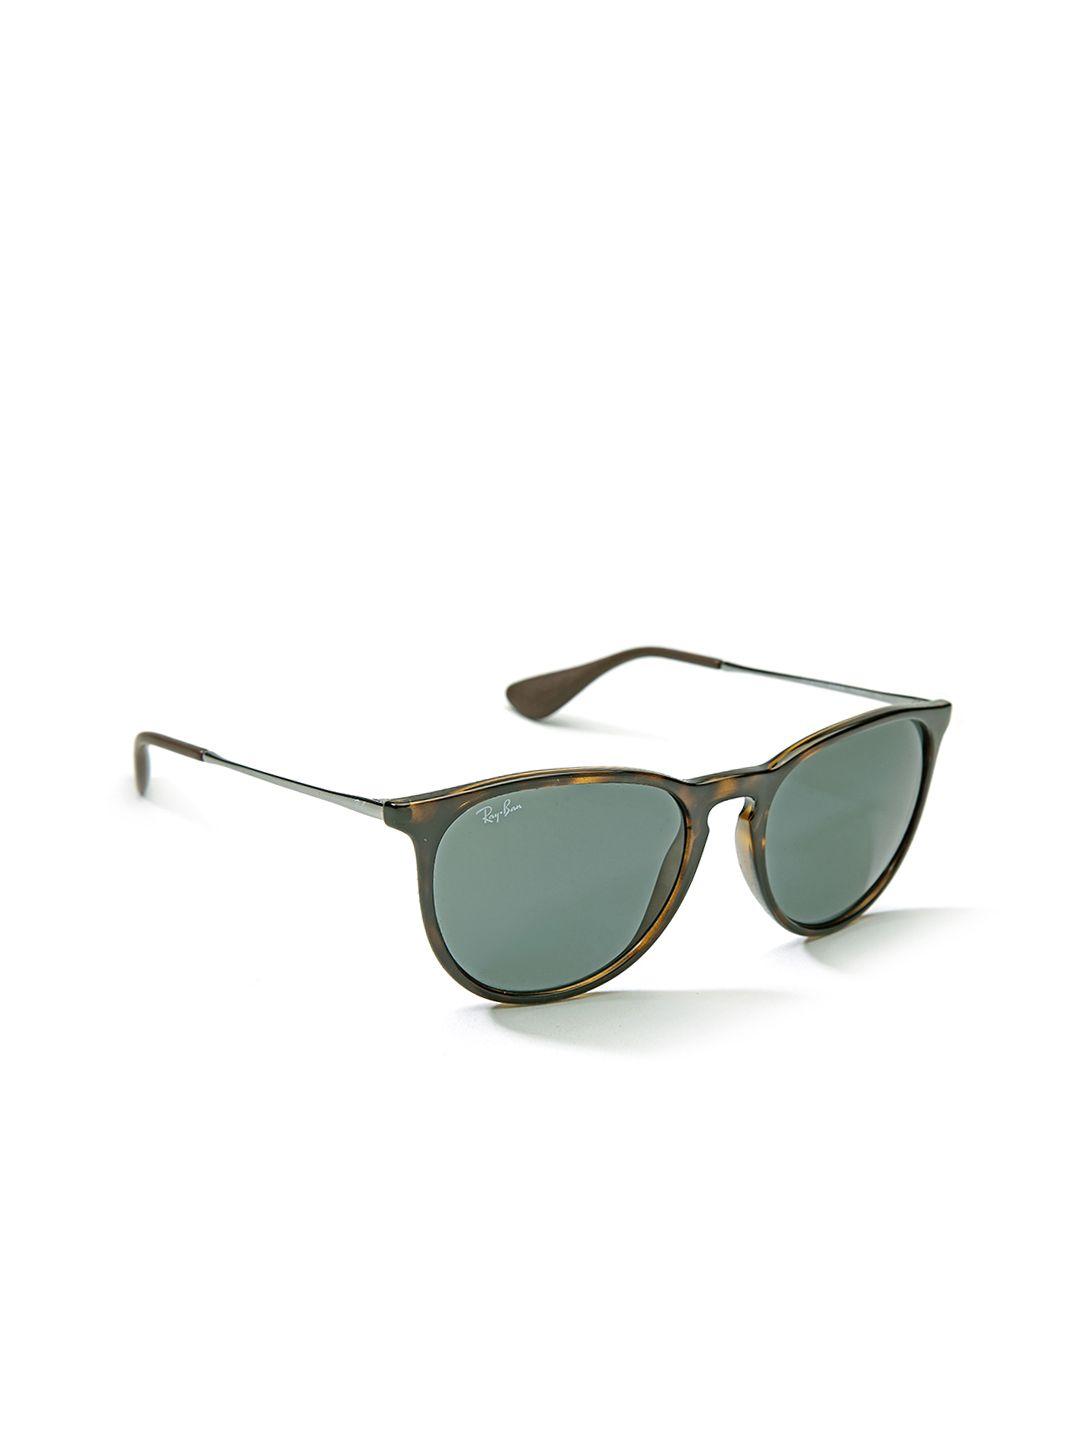 ray-ban unisex oval sunglasses 0rb4171710/7154